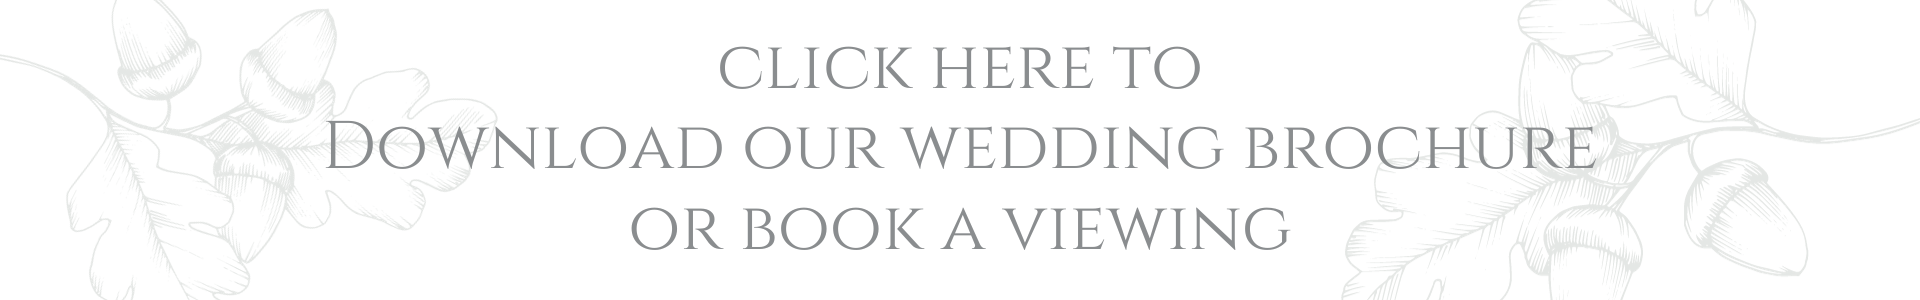 Text saying download our wedding brochure on a white background with faded pictures of acorns